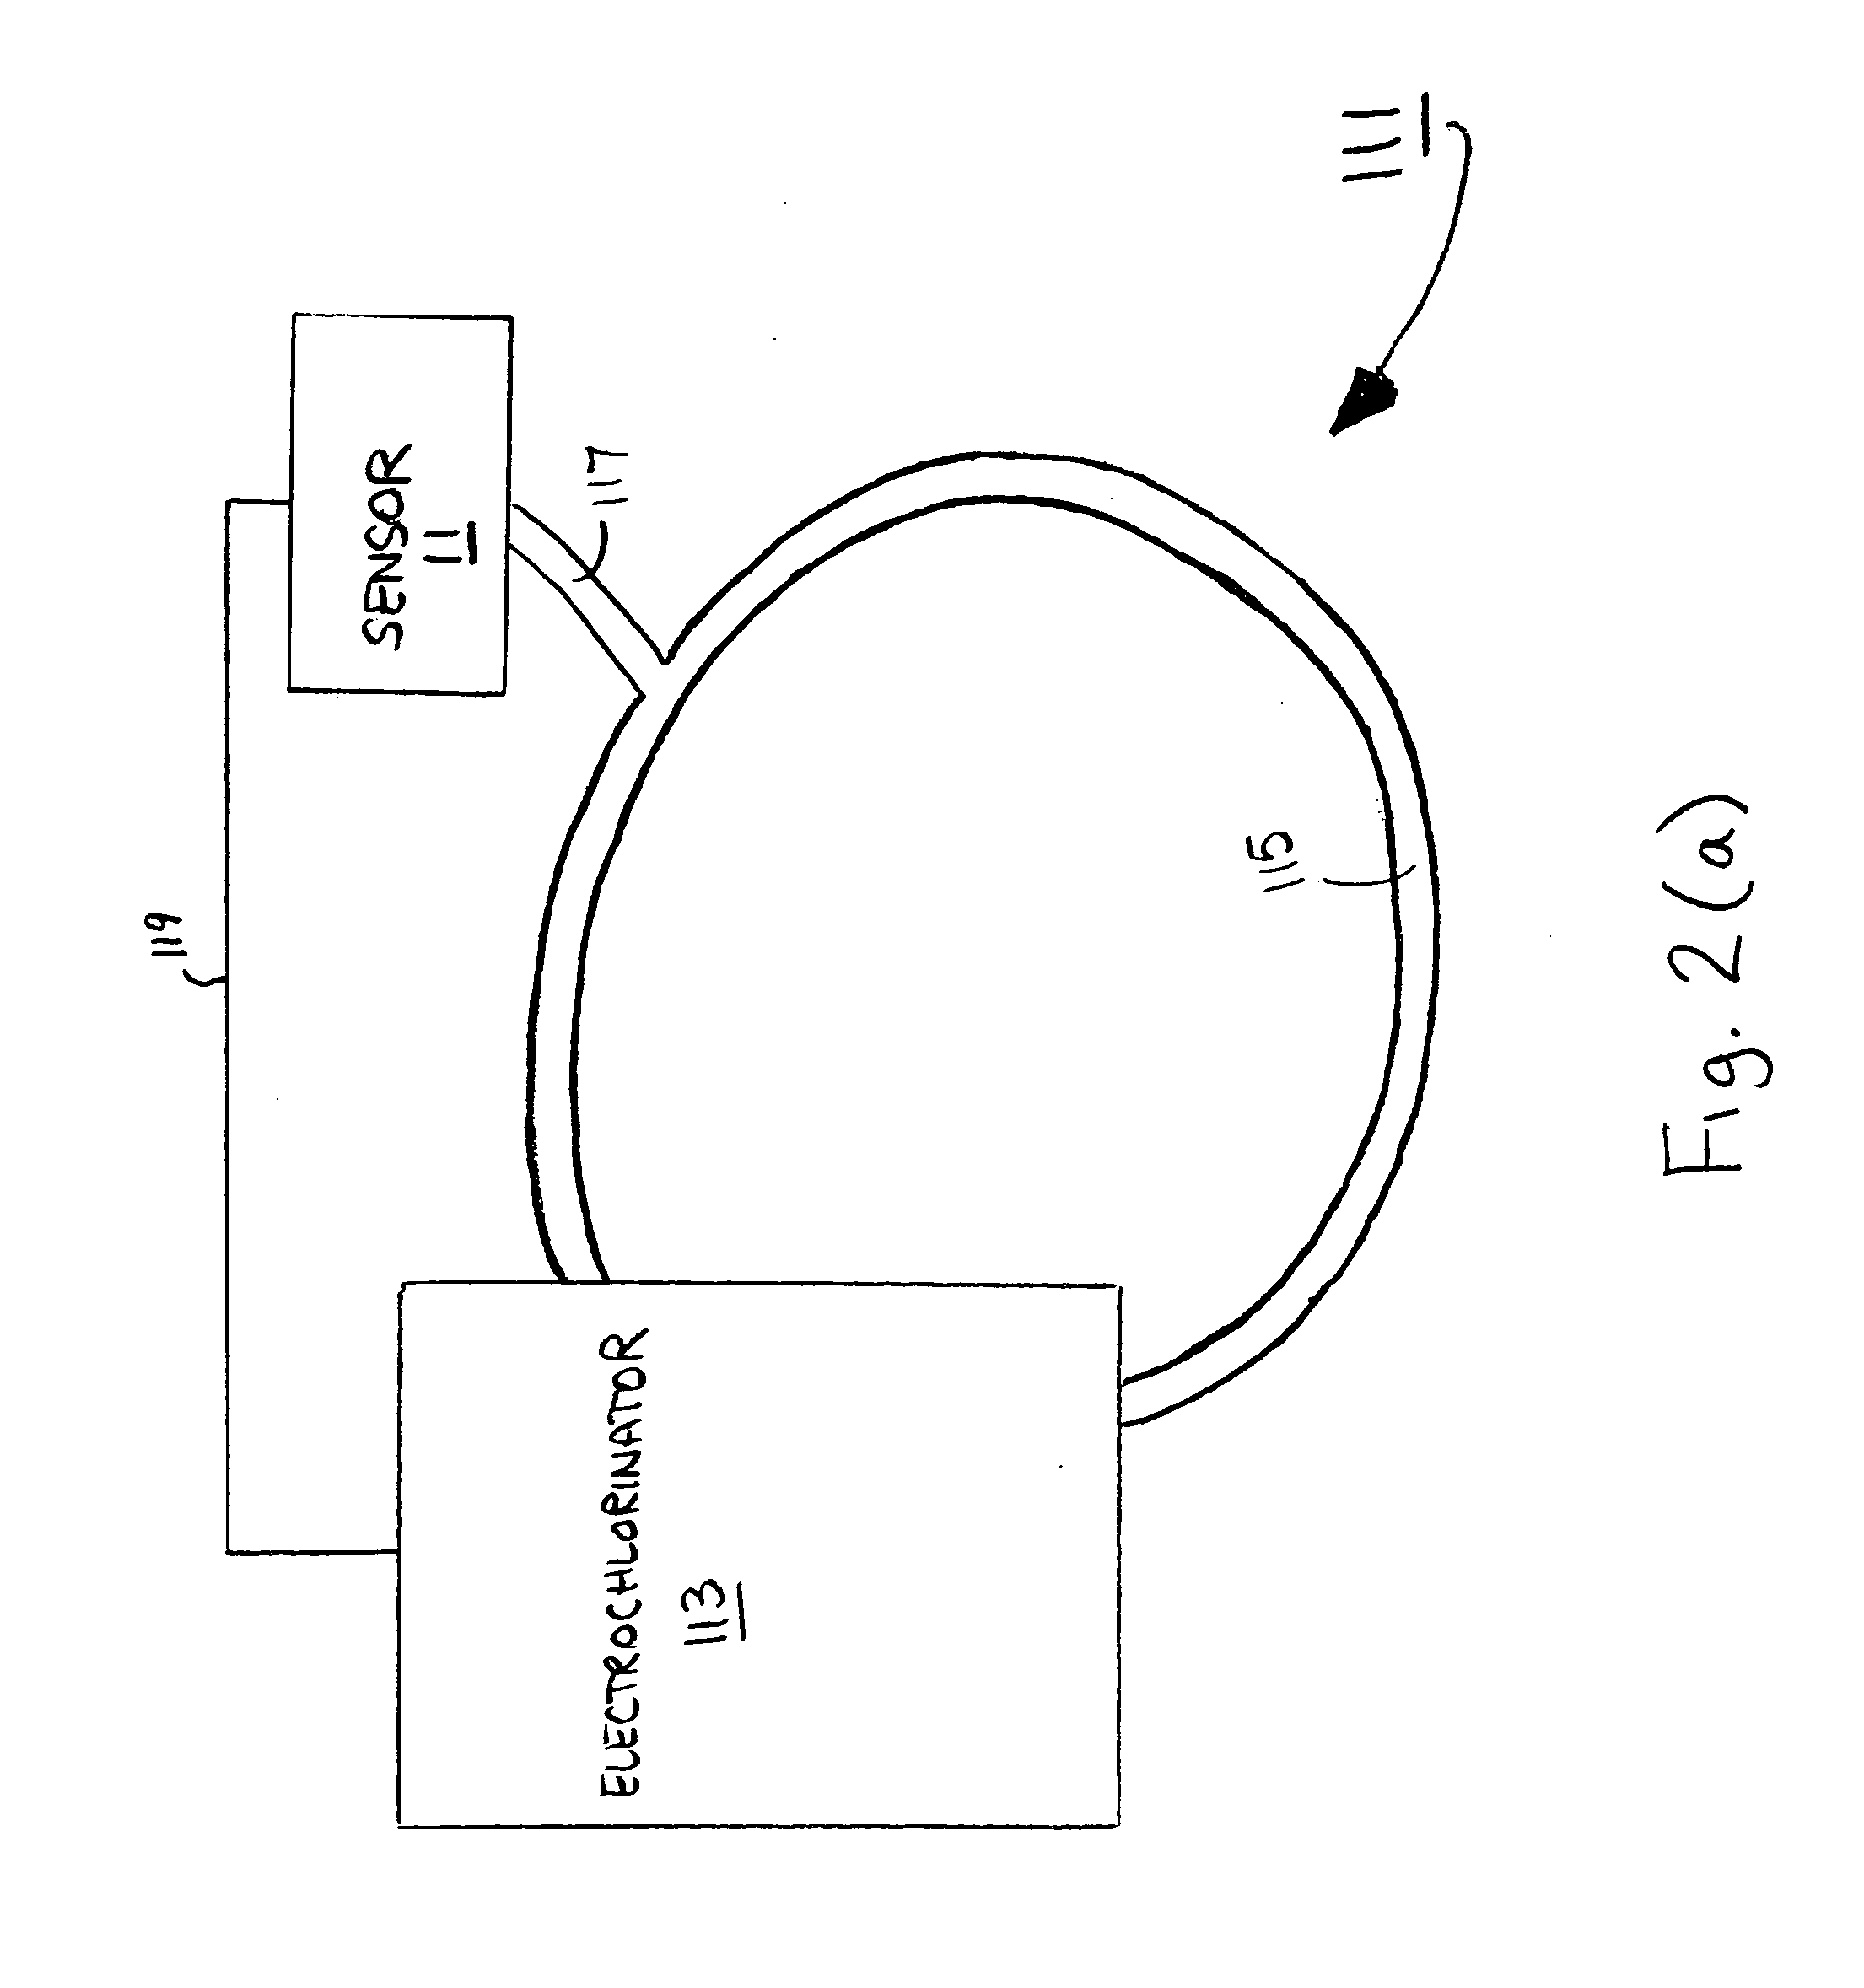 Method for detecting individual oxidant species and halide anions in a sample using differential pulse non-stripping voltammetry